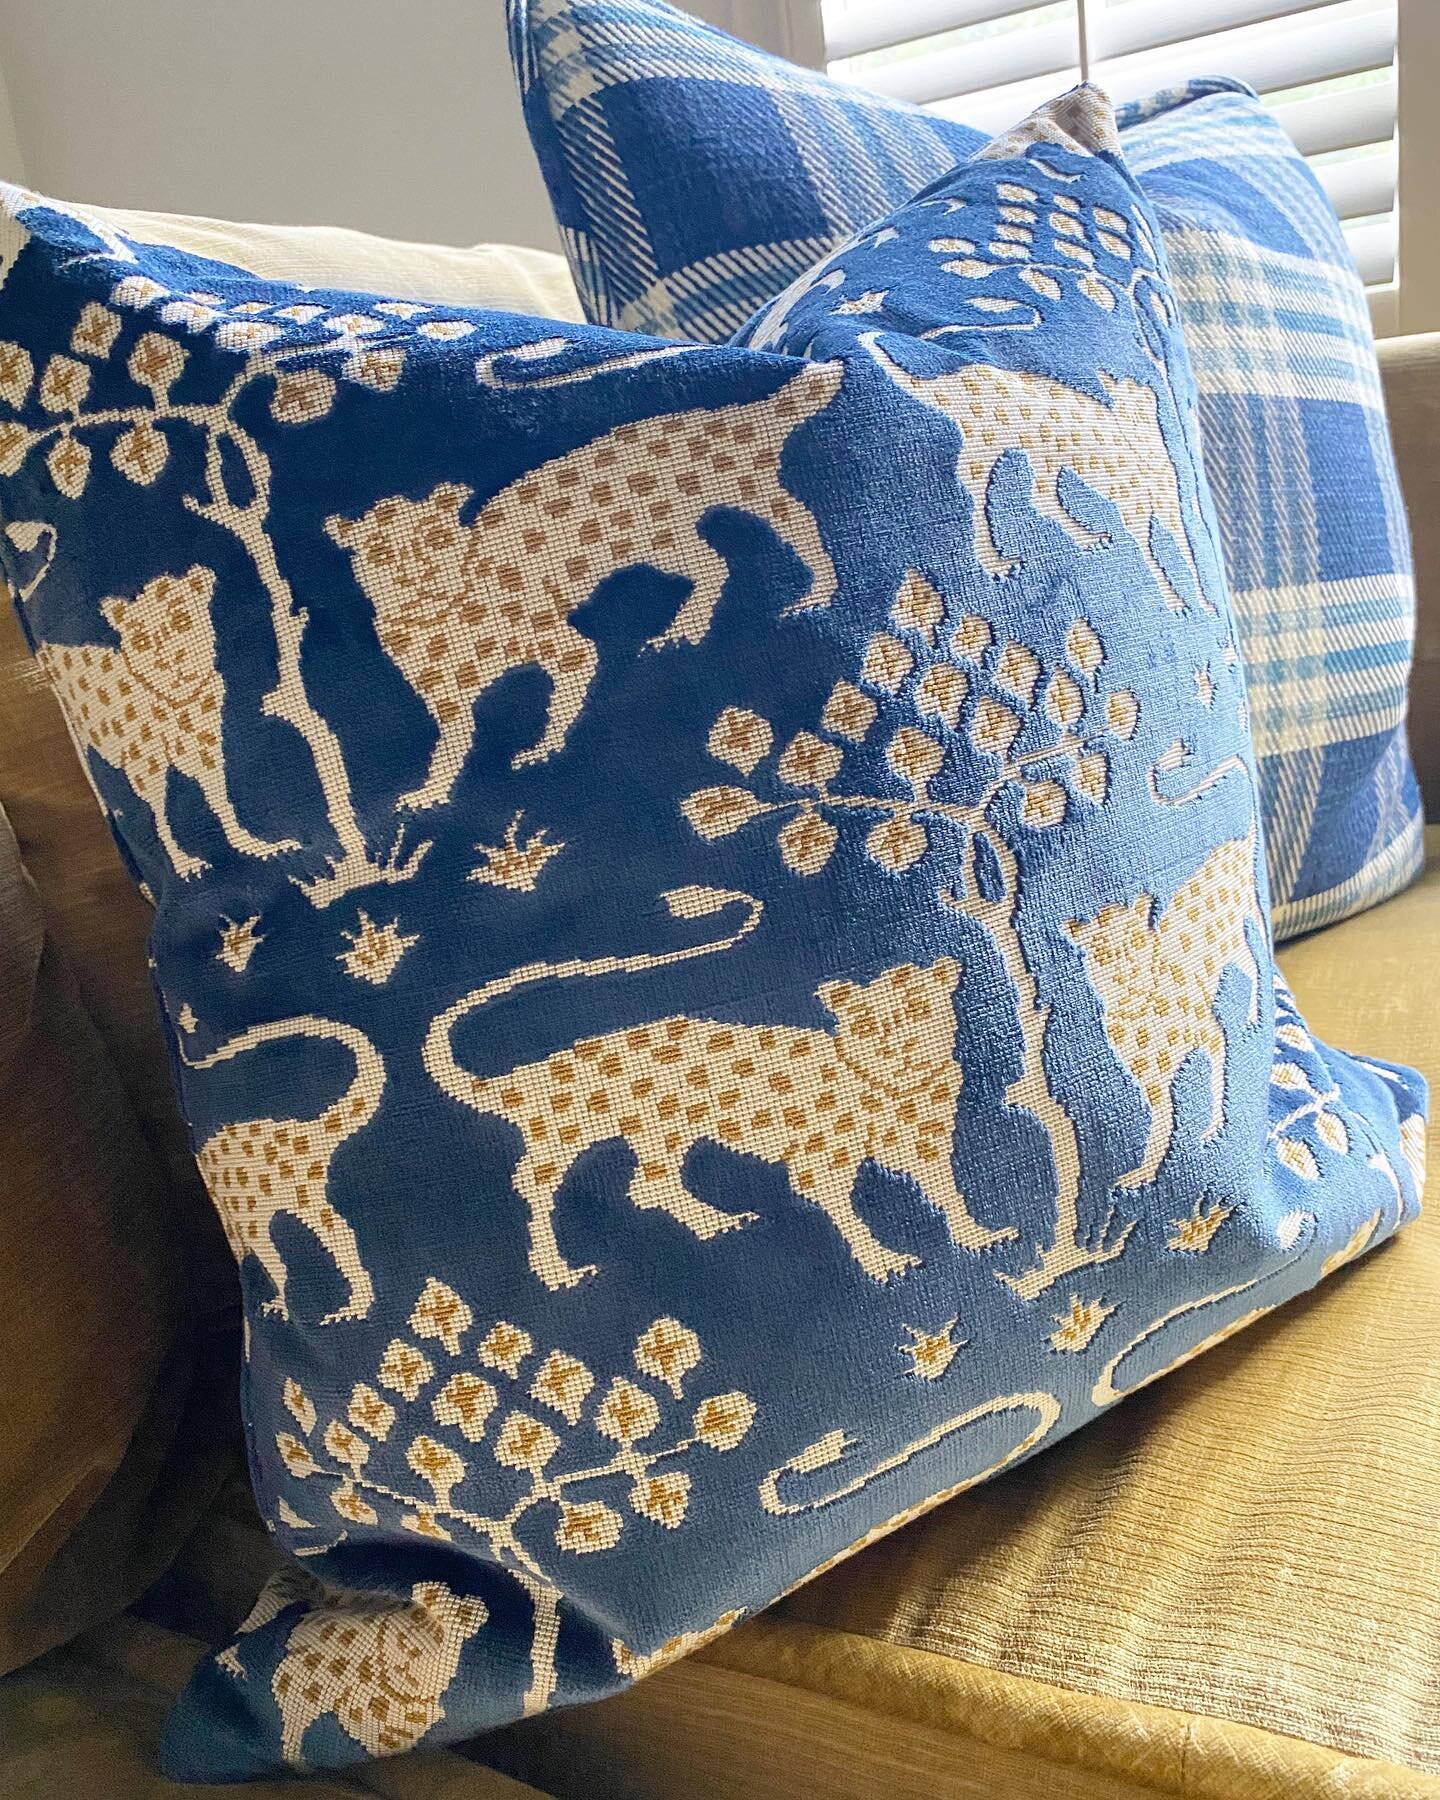 🐆💙 can&rsquo;t get enough of this fab @schumacher1889 fabric 💙🐆